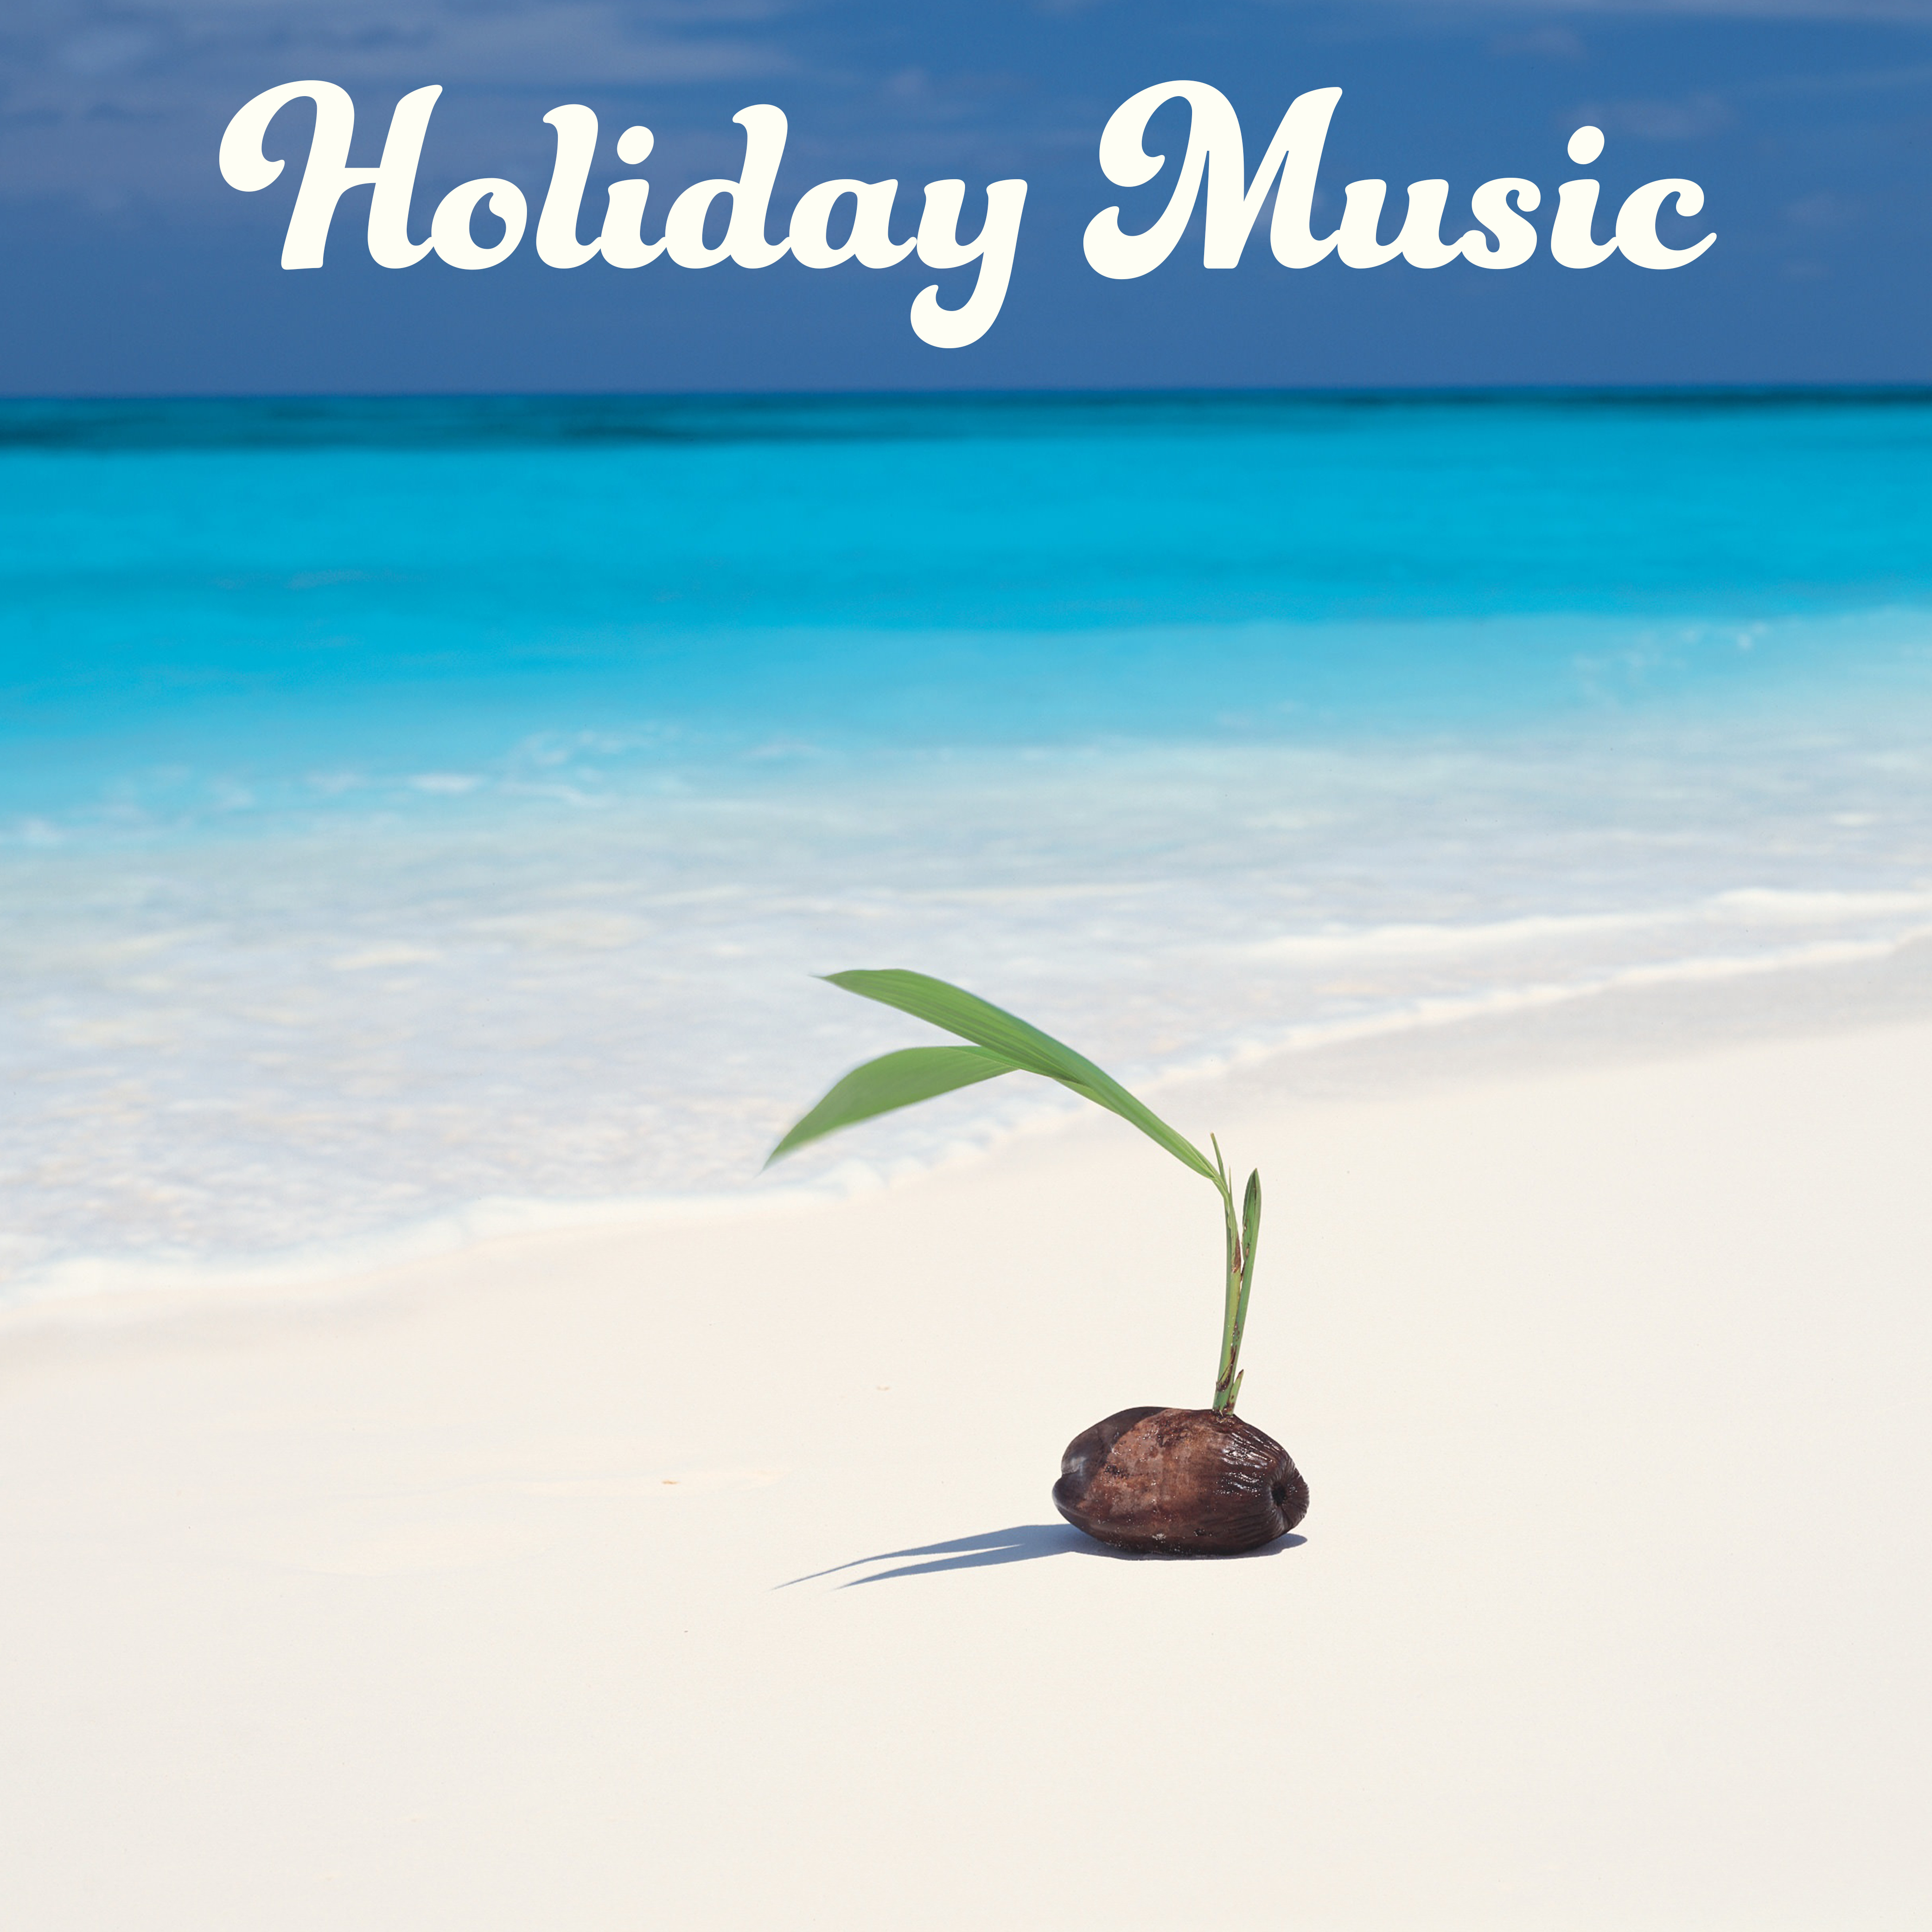 Holiday Music – Beach Chill, Relaxation Sounds for Mind, Summertime, Peaceful Music to Rest, Chill Out Under Plams